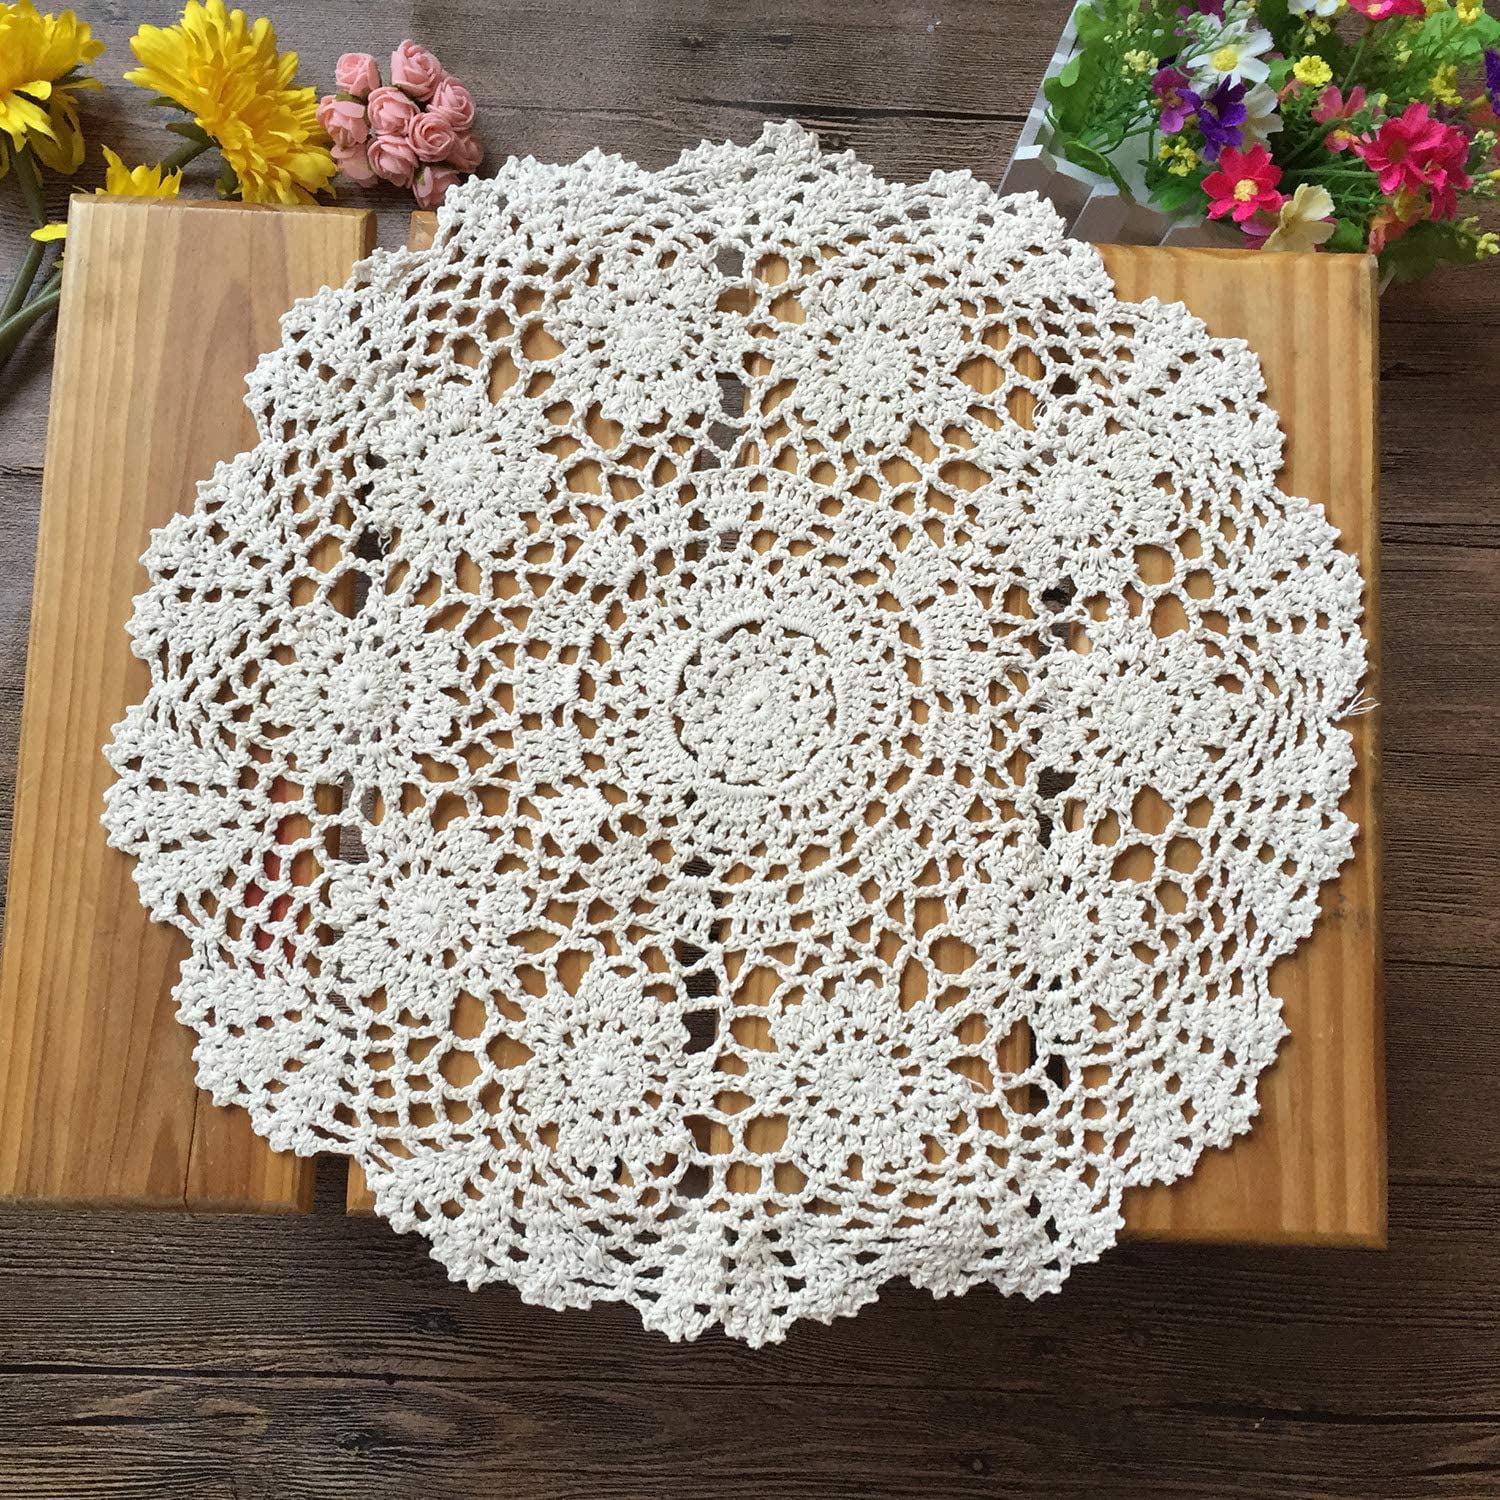 Set of 4 Dining Table Place Mats Flower Placemat Round Cotton Crochet Lace Doily 